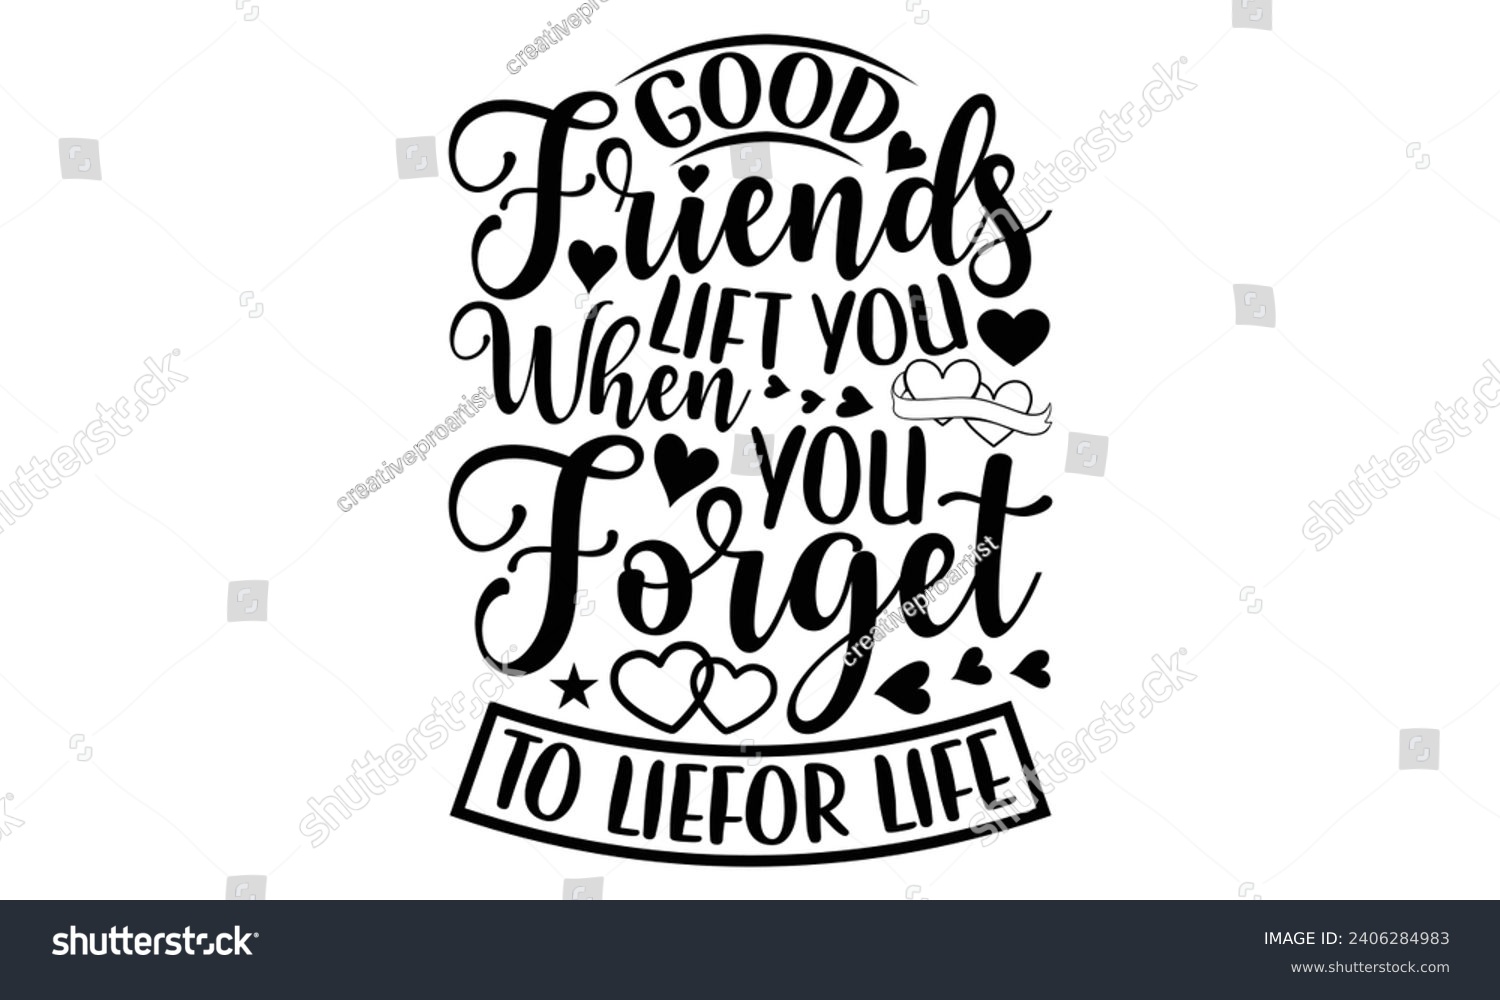 SVG of Good Friends Lift You When You Forget To Live For Life- Best friends t- shirt design, Hand drawn lettering phrase, Illustration for prints on bags, posters, cards eps, Files for Cutting, Isolated on w svg